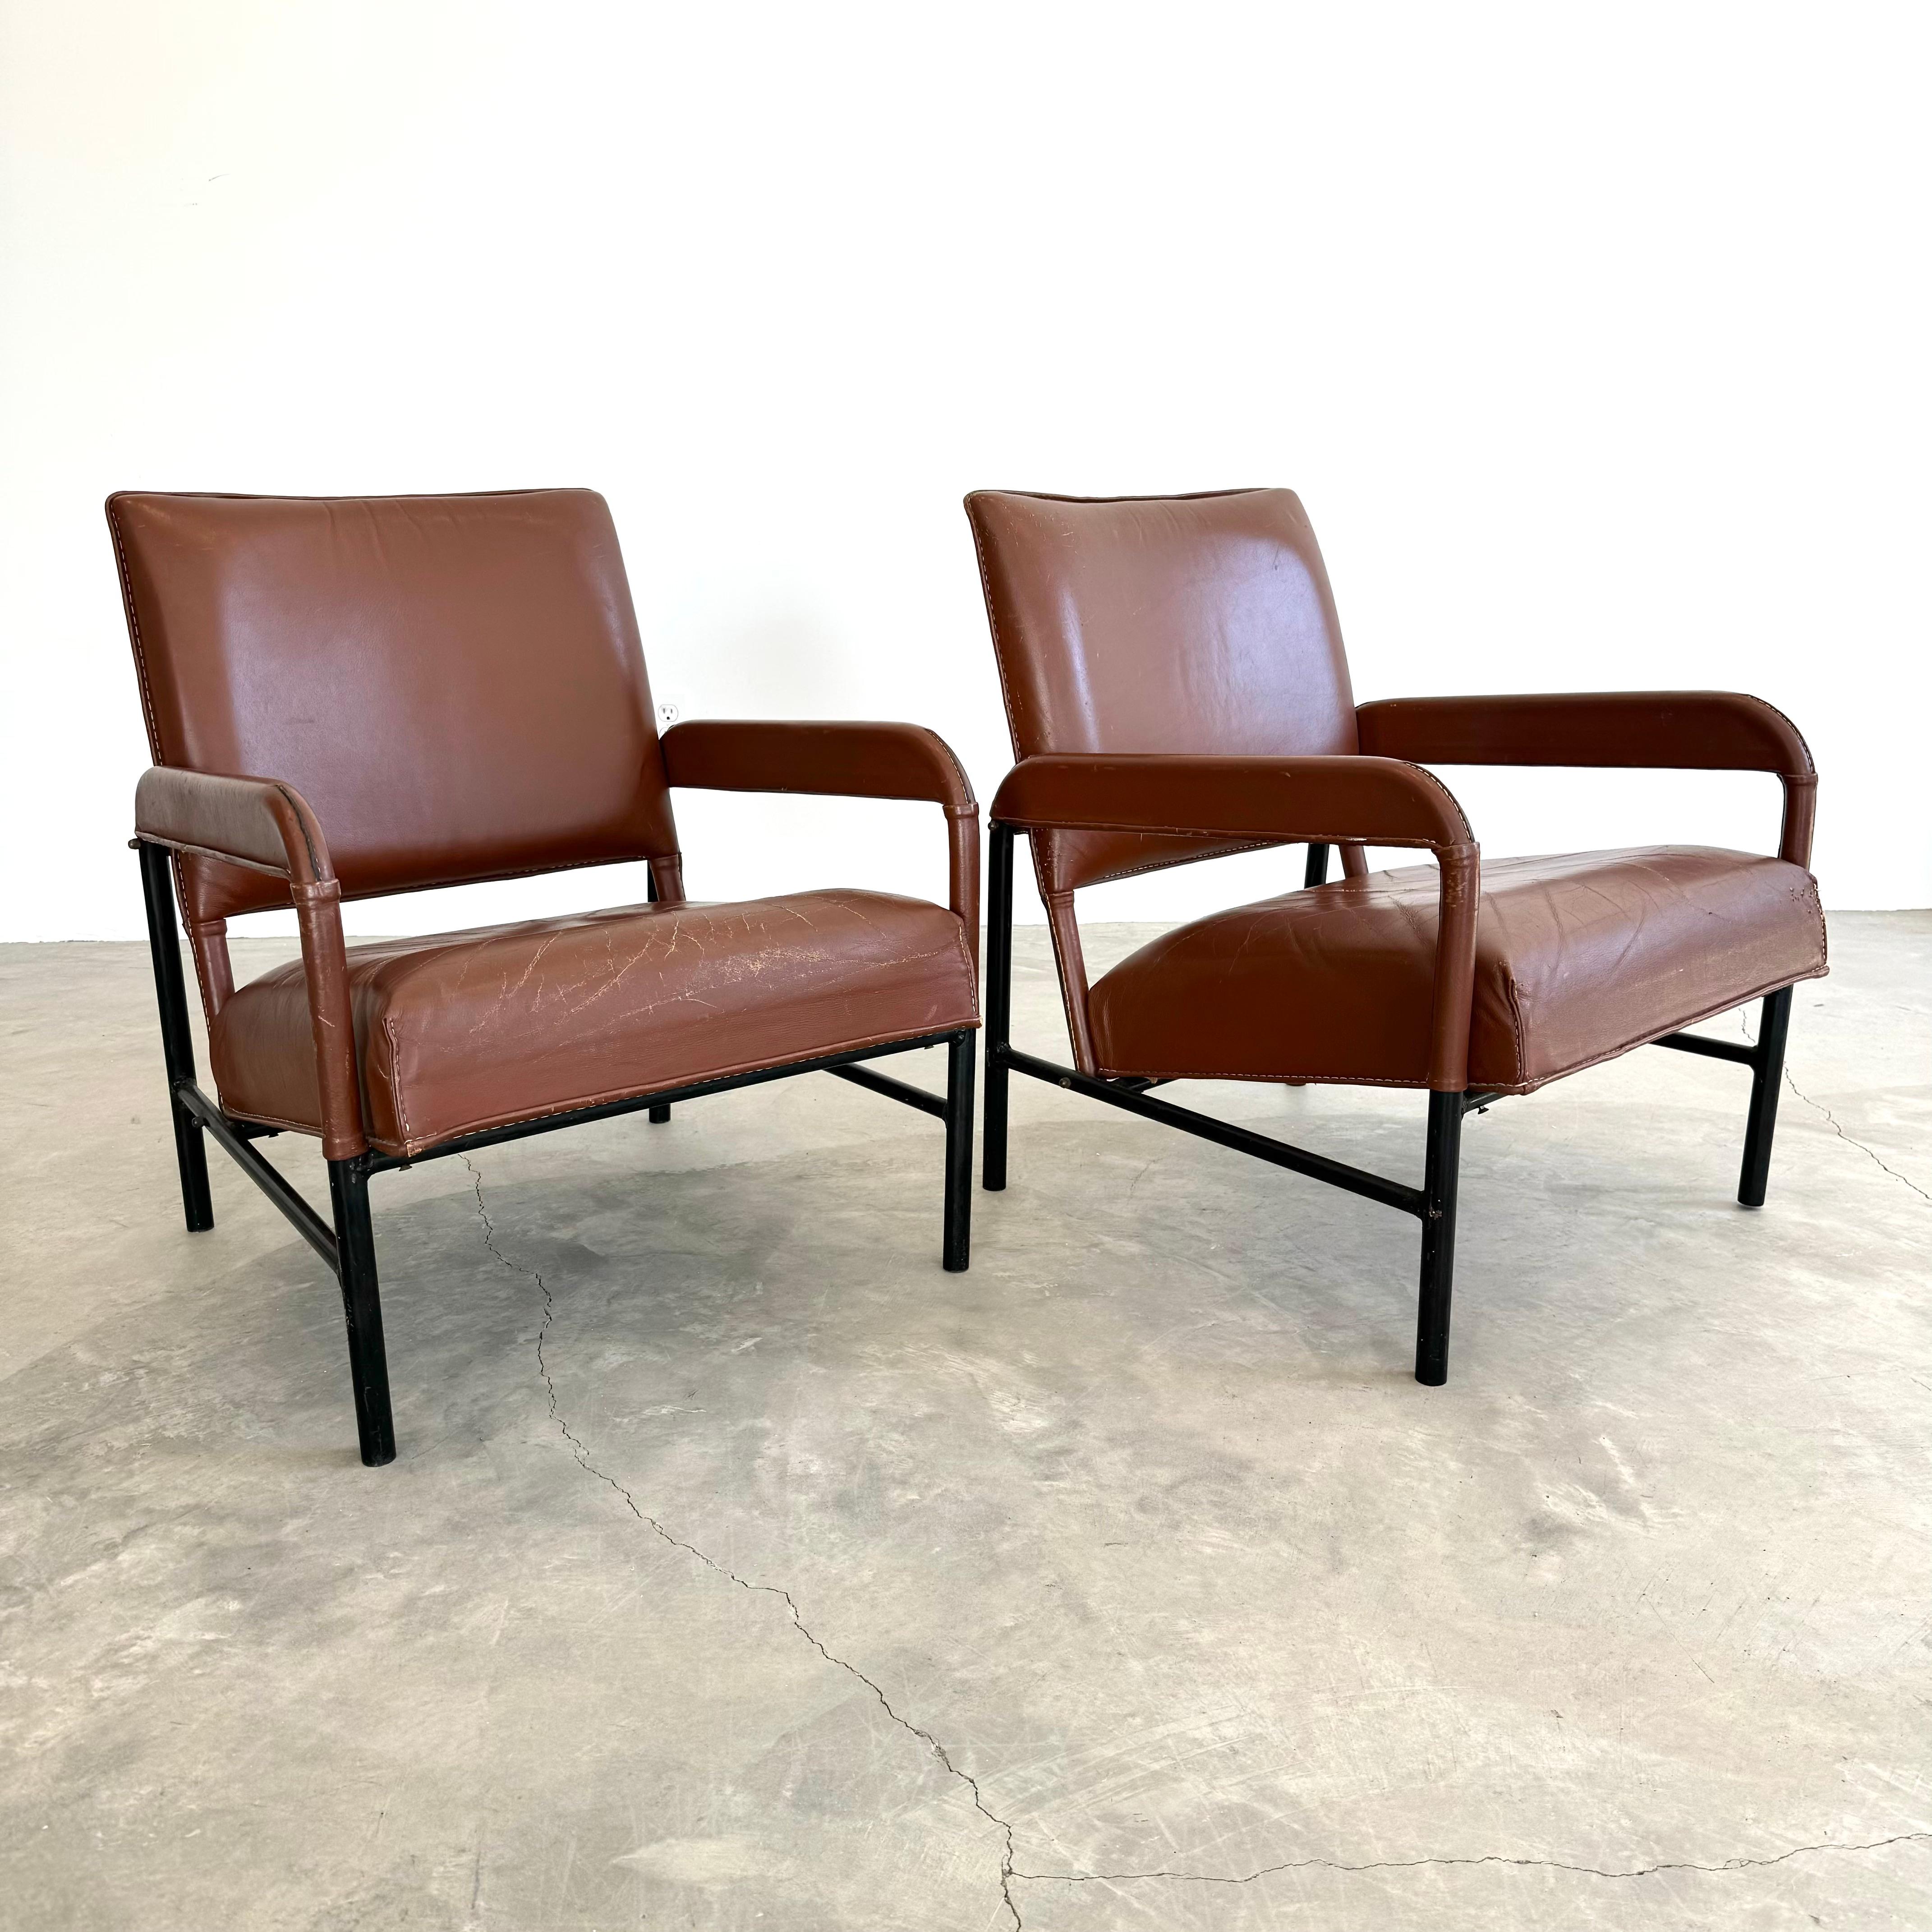 Pair of Saddle Leather and Iron Armchairs by Jacques Adnet, 1950s France For Sale 3